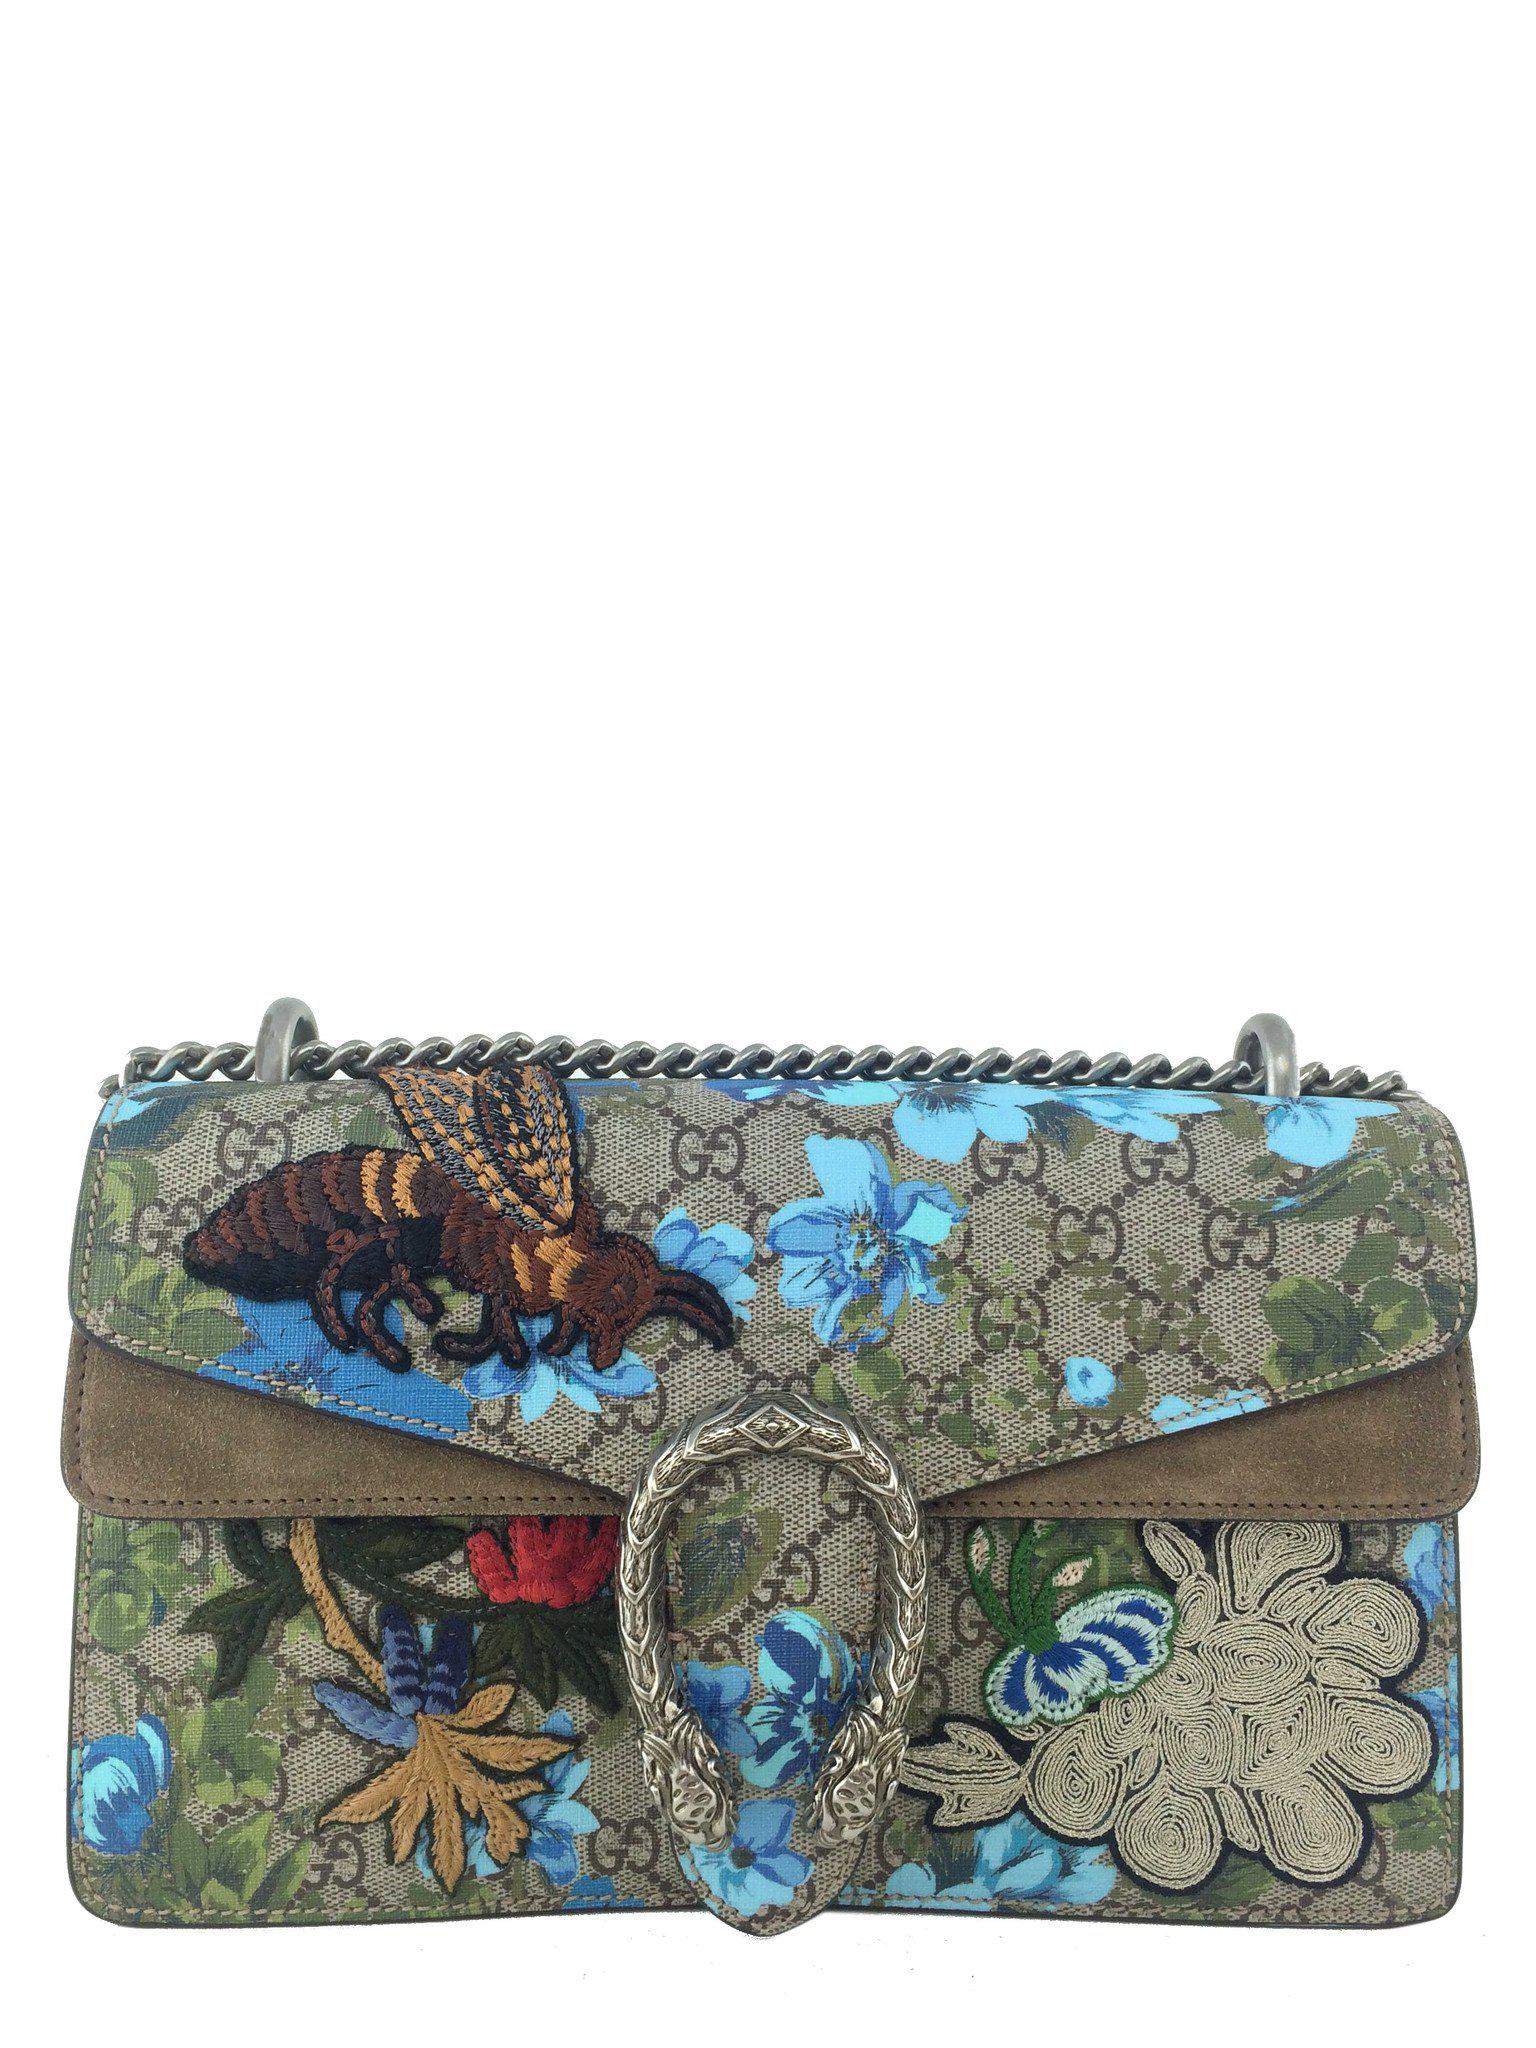 Gucci Painted Flowers and Patches GG Supreme Small Dionysus Shoulder B ...